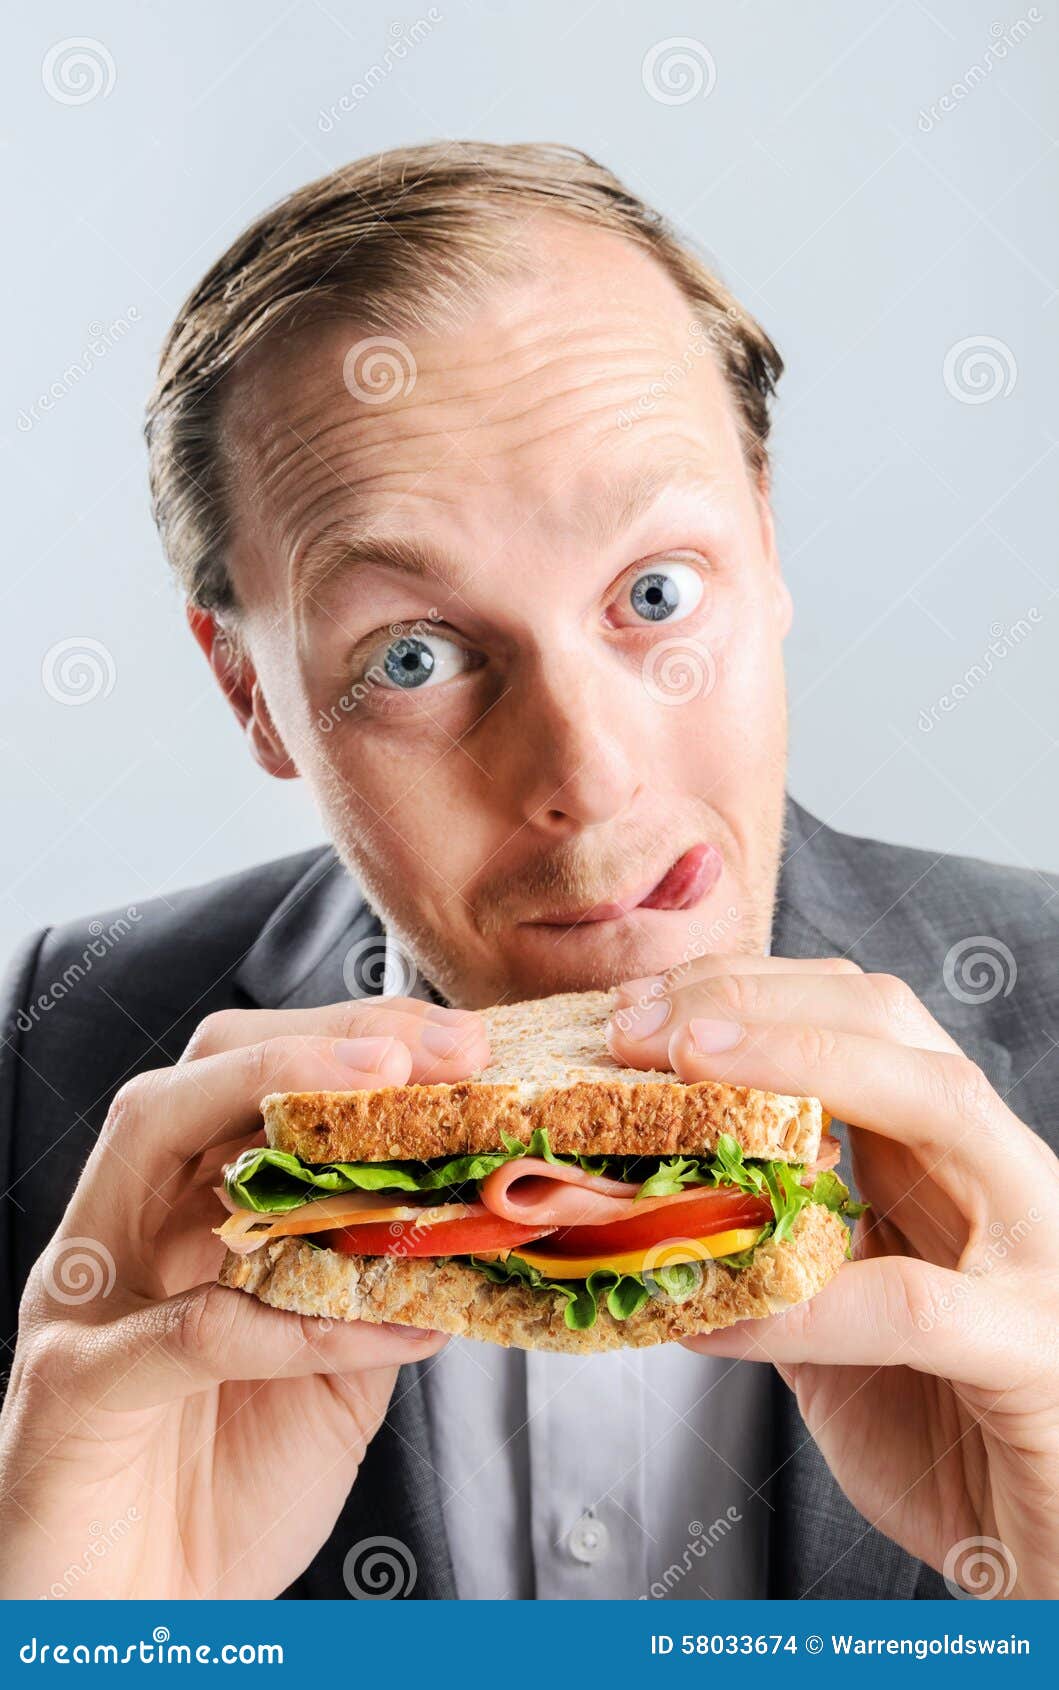 comical man eating sandwich with funny expression